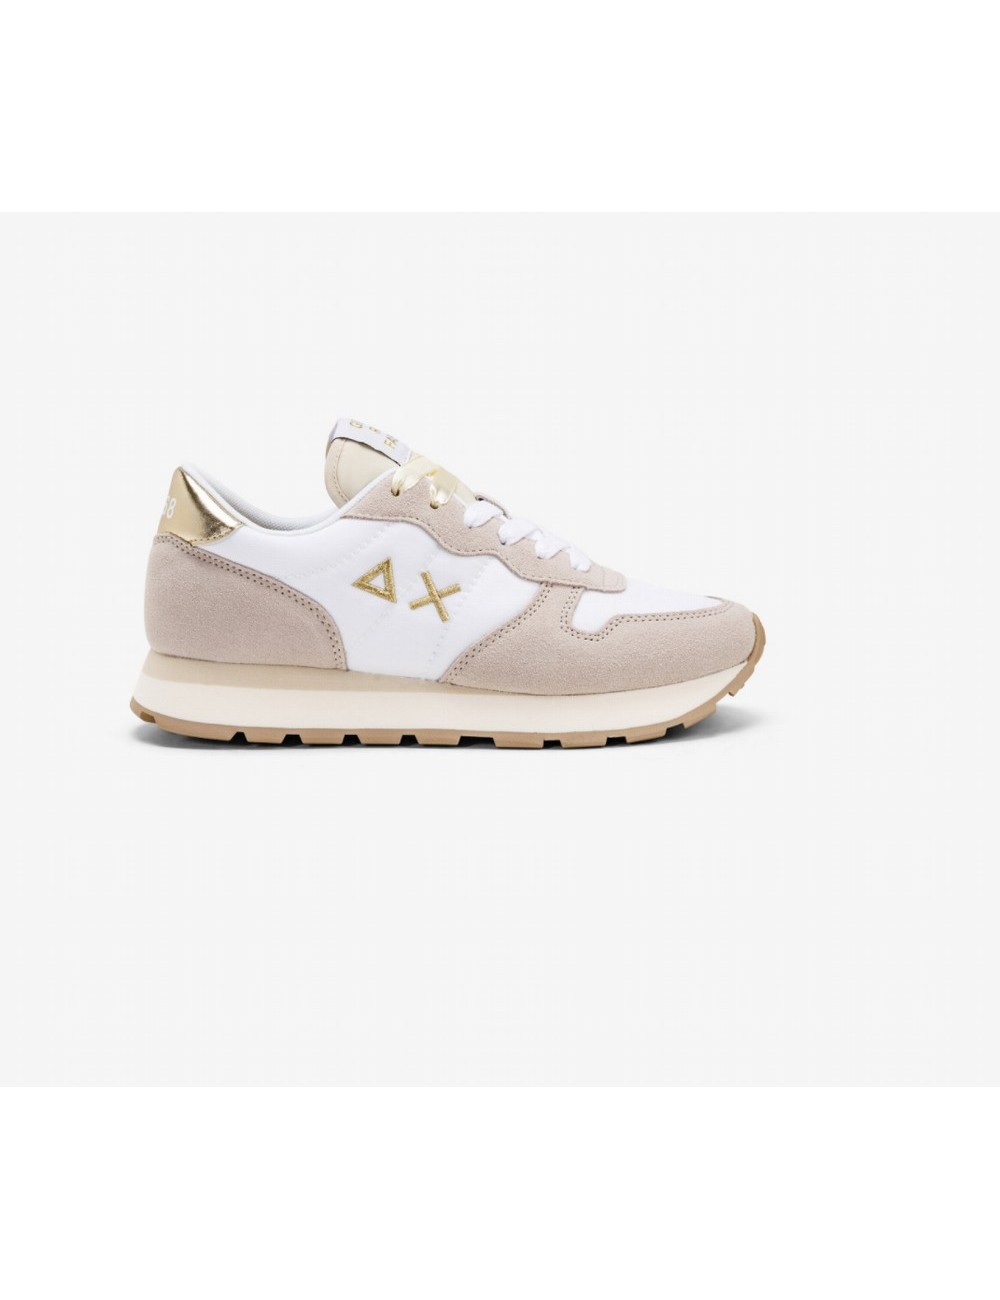 SNEAKERS MUJER SUN 68 ALLY GOLD BLANCO